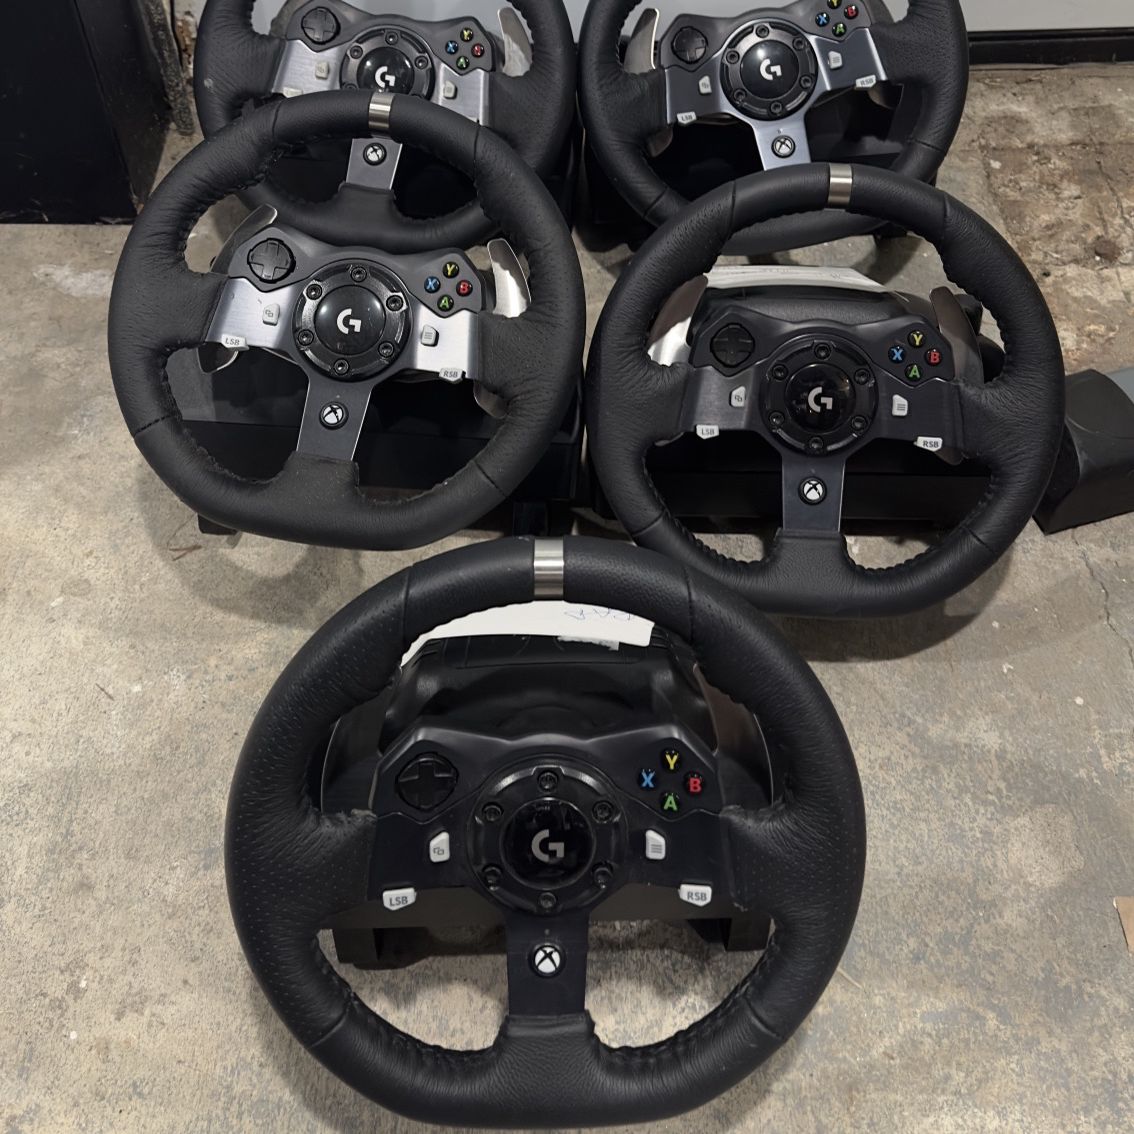 Logitech G920 Xbox/PC Steering Wheels - For Parts